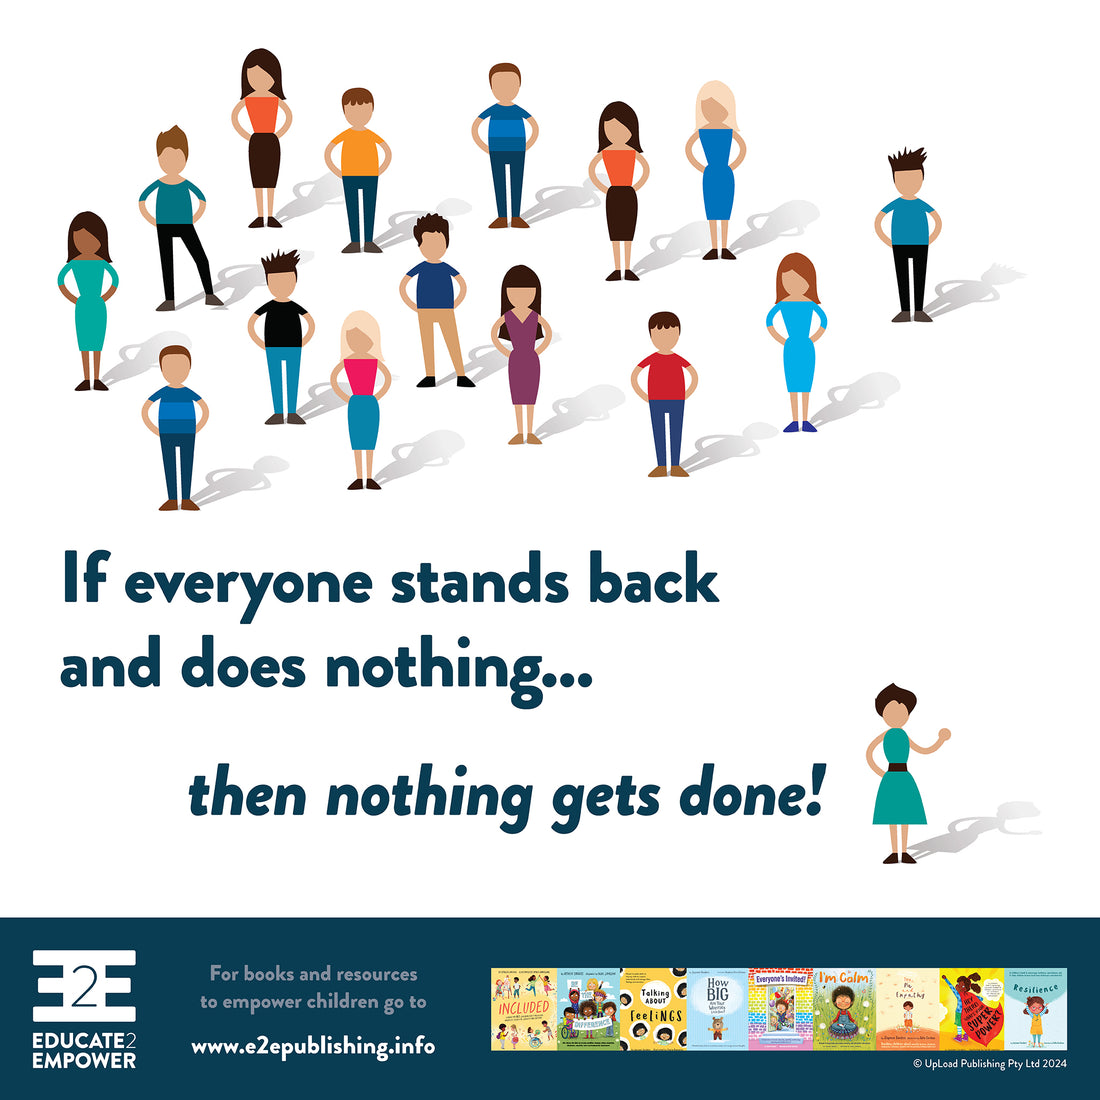 If everyone stands back and does nothing...